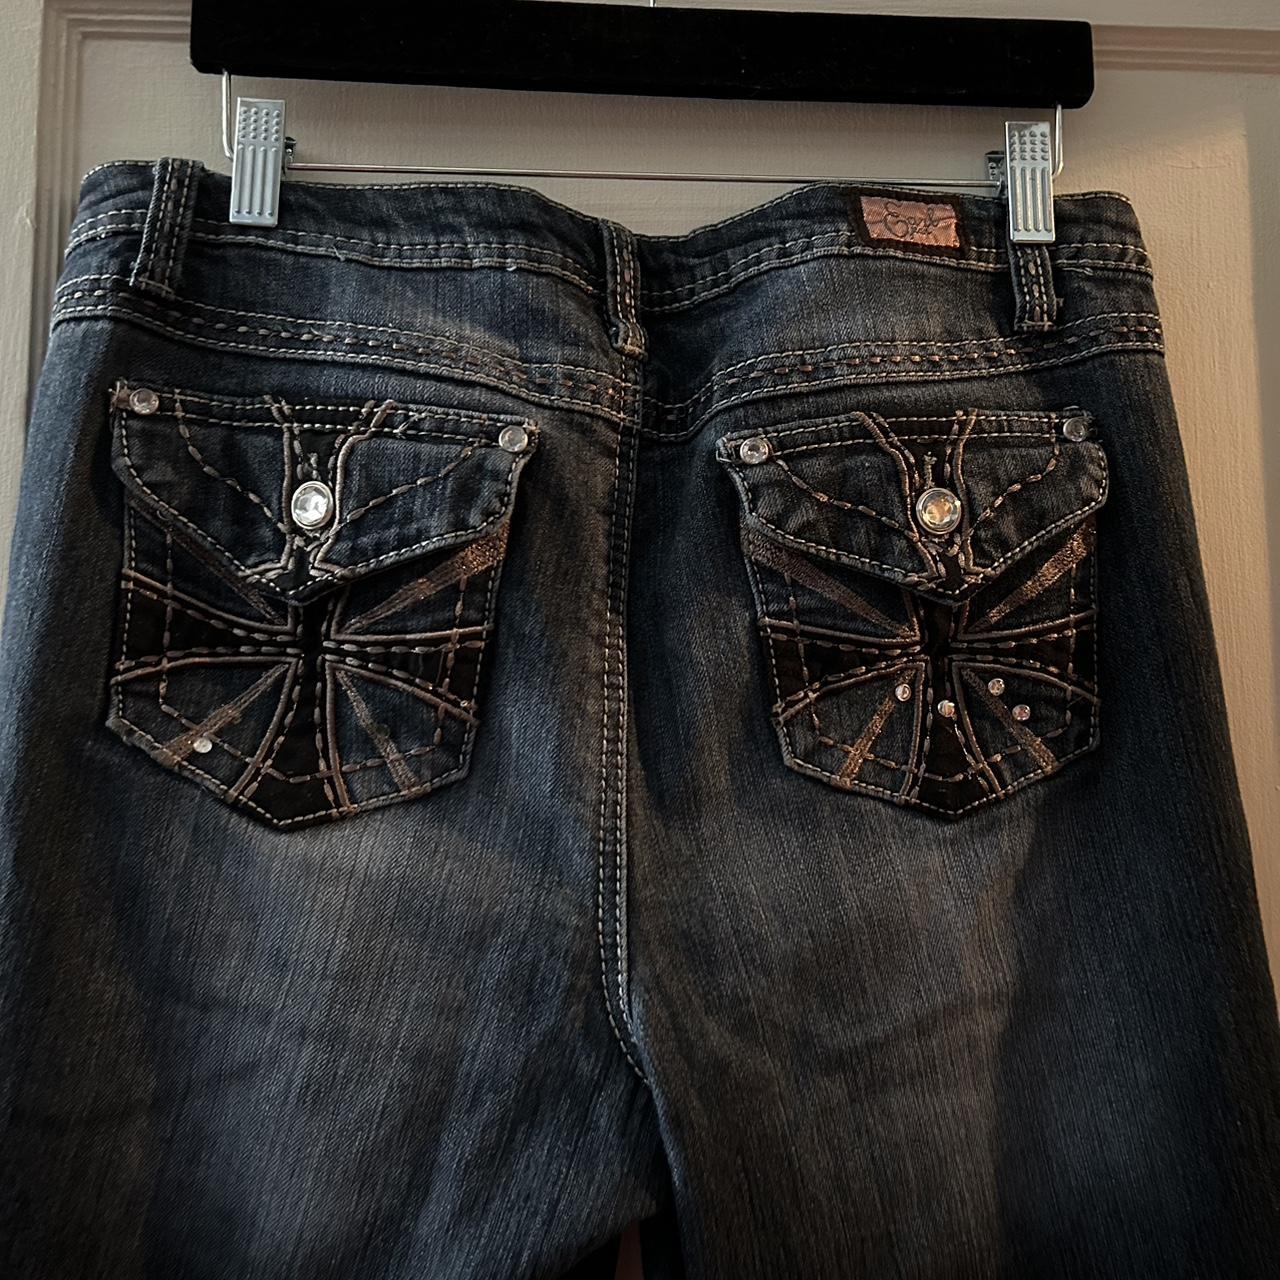 Y2K BEDAZZLED ECCENTRIC FLARED JEANS WITH A ACID... - Depop